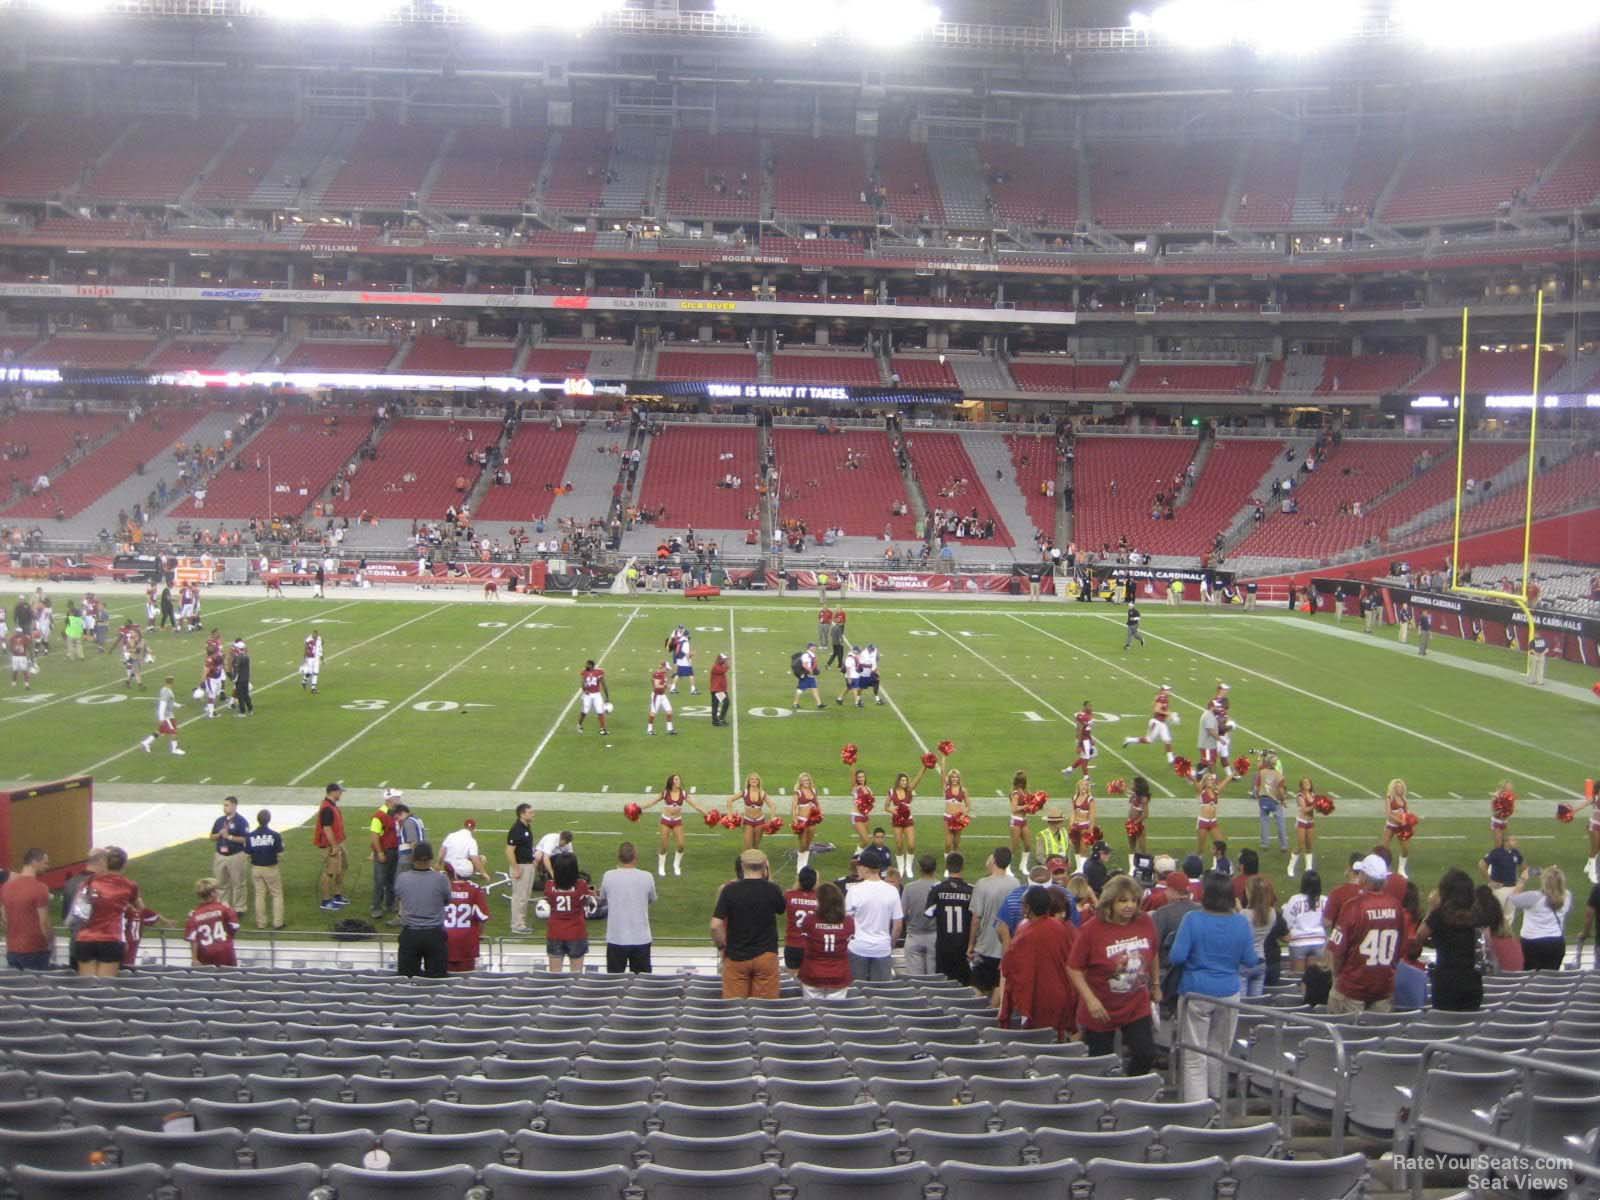 section 106, row 20 seat view  for football - state farm stadium